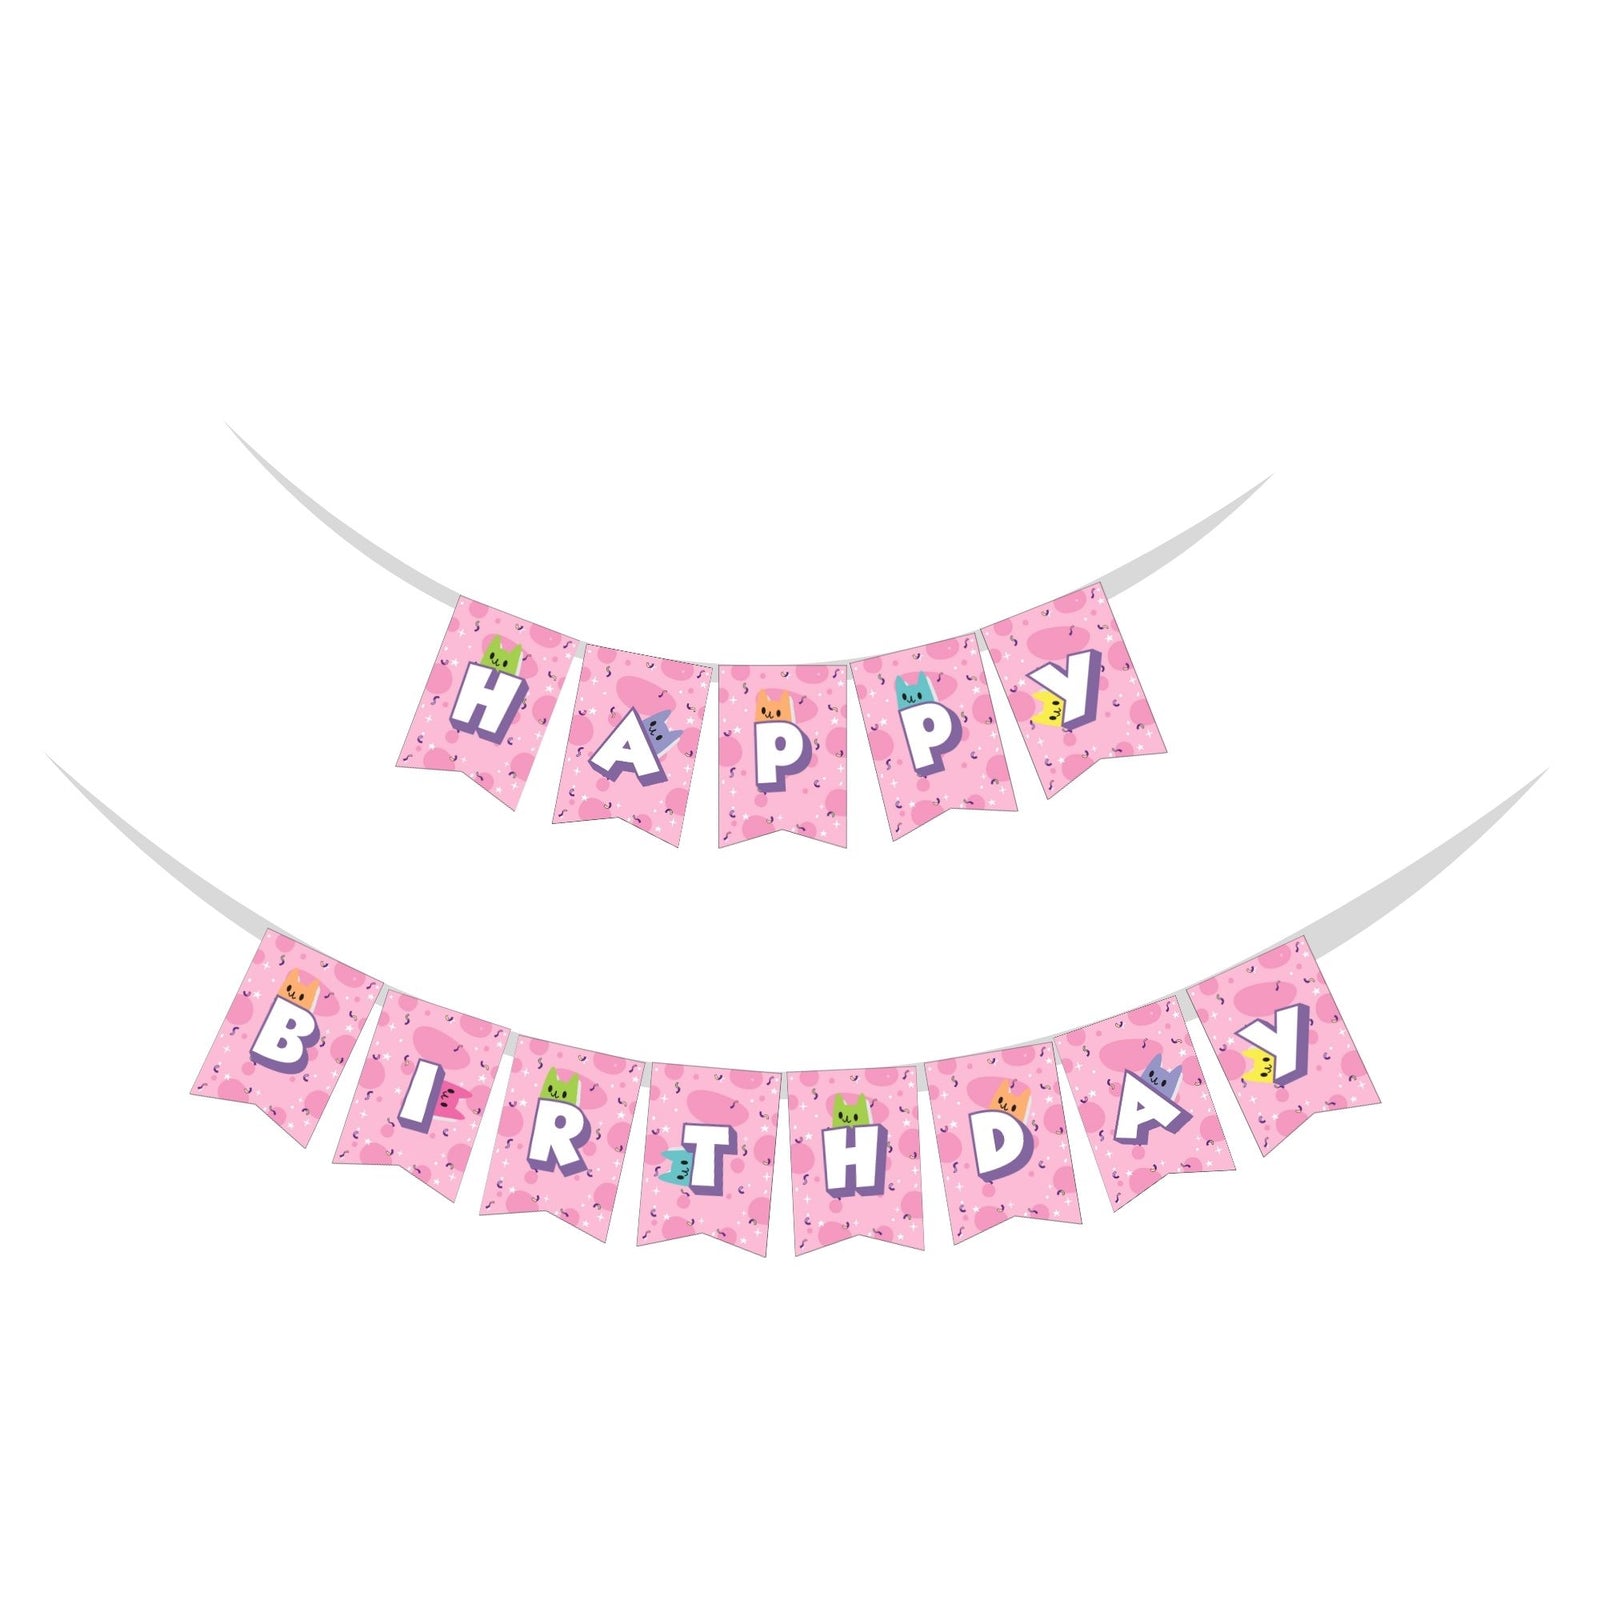 Gabby Doll House Theme Birthday Party Decorations - Banner, Cutouts, Favor Tags, Danglers (6 inches/250 GSM Cardstock/Mixcolour/61Pcs)